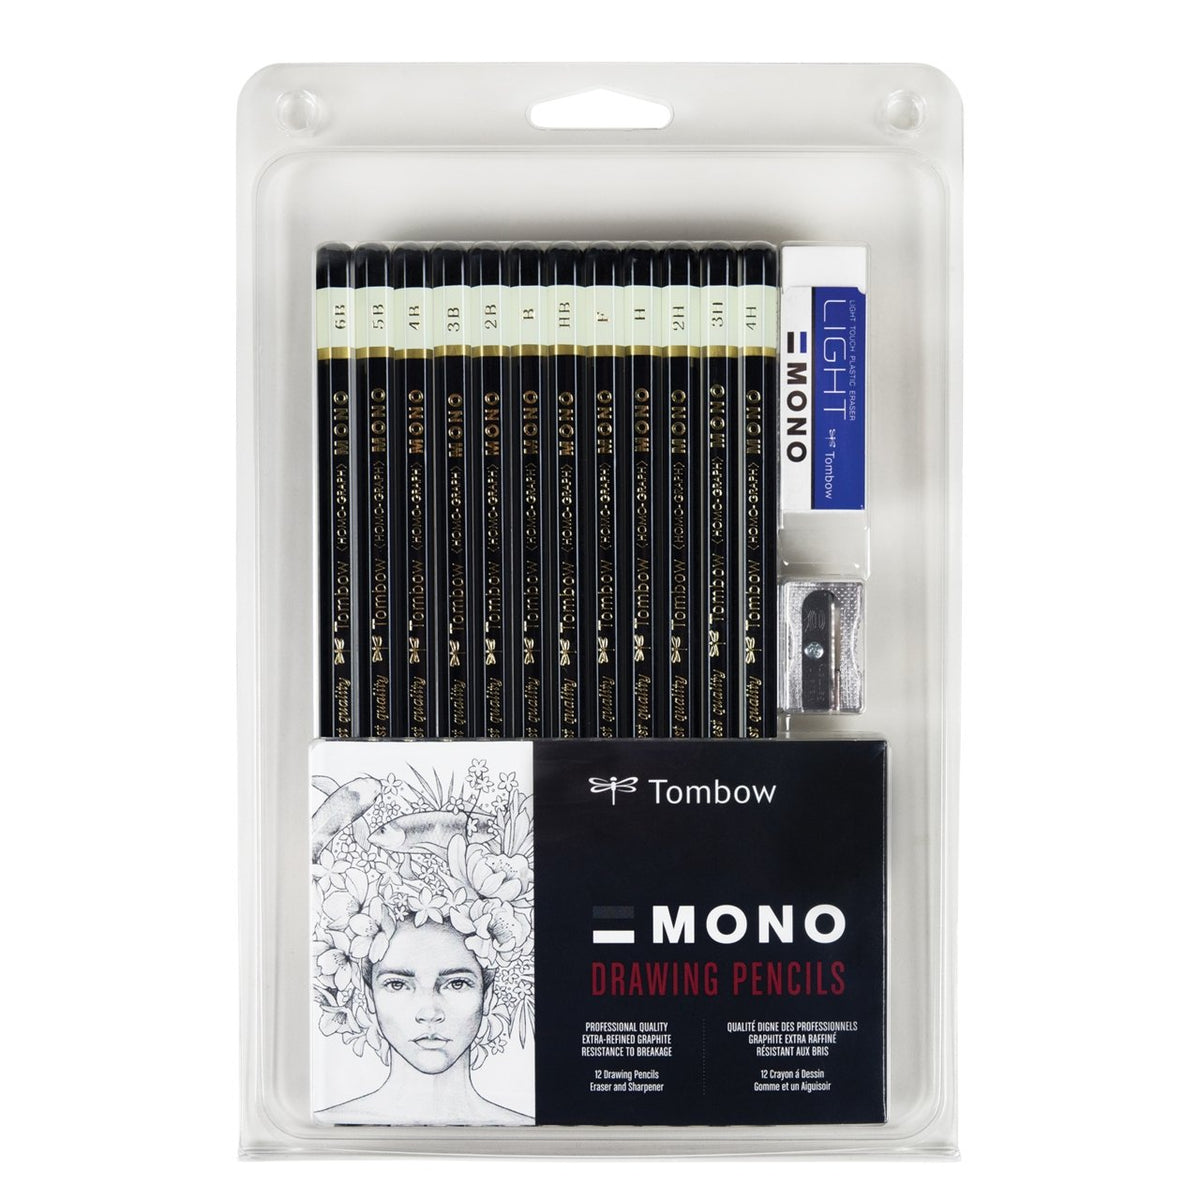 Tombow MONO Drawing Pencil Set of 12 Pencils, Eraser and Sharpener - merriartist.com